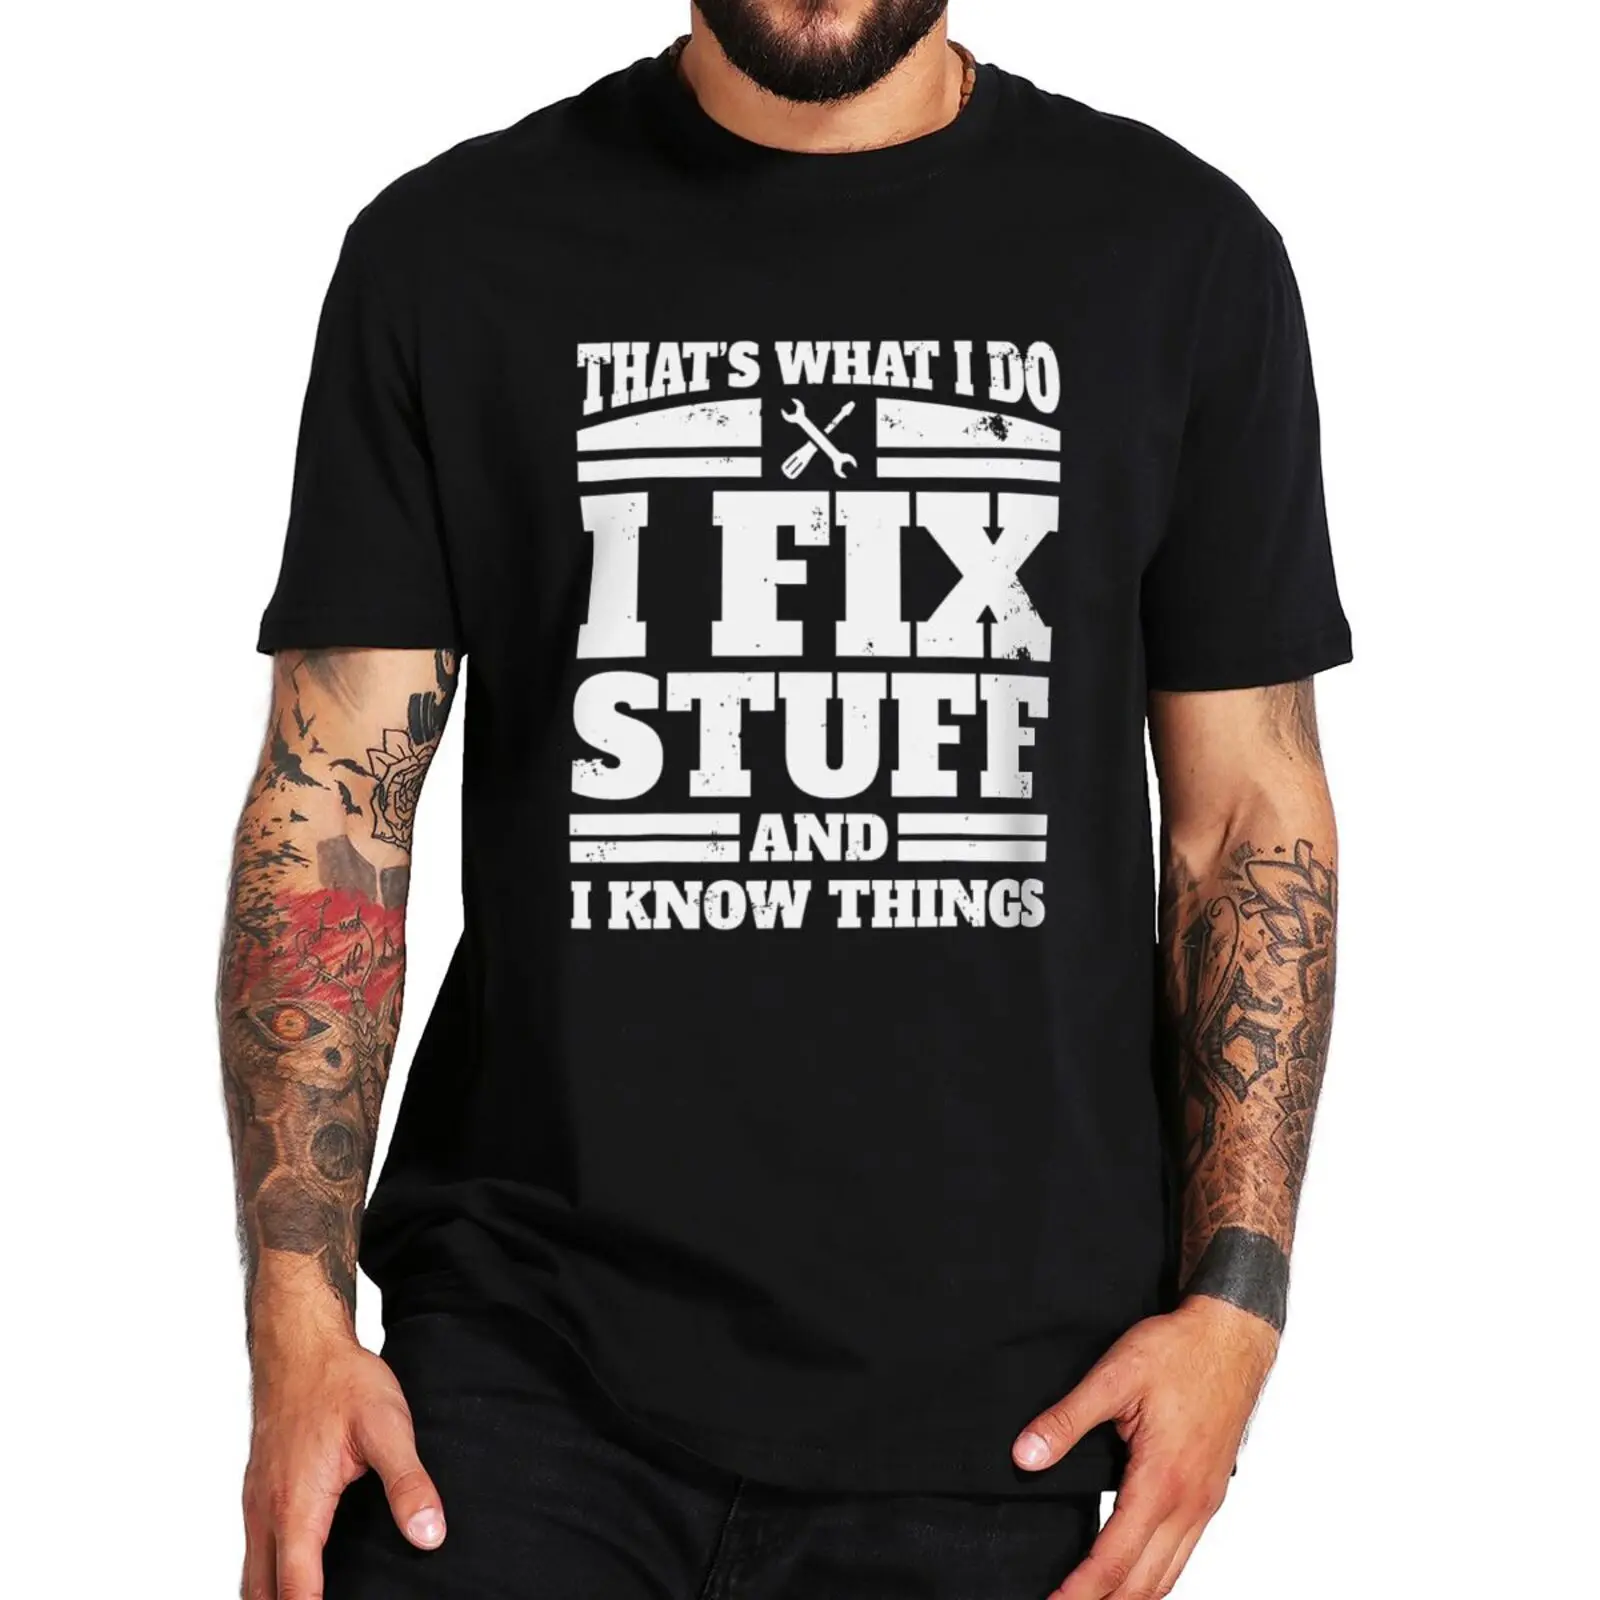 That's What I Do I Fix And I Know Things T-shirt Funny Mechanic Lovers Vintage Tee Tops Cotton Casual Summer Unsiex T Shirt